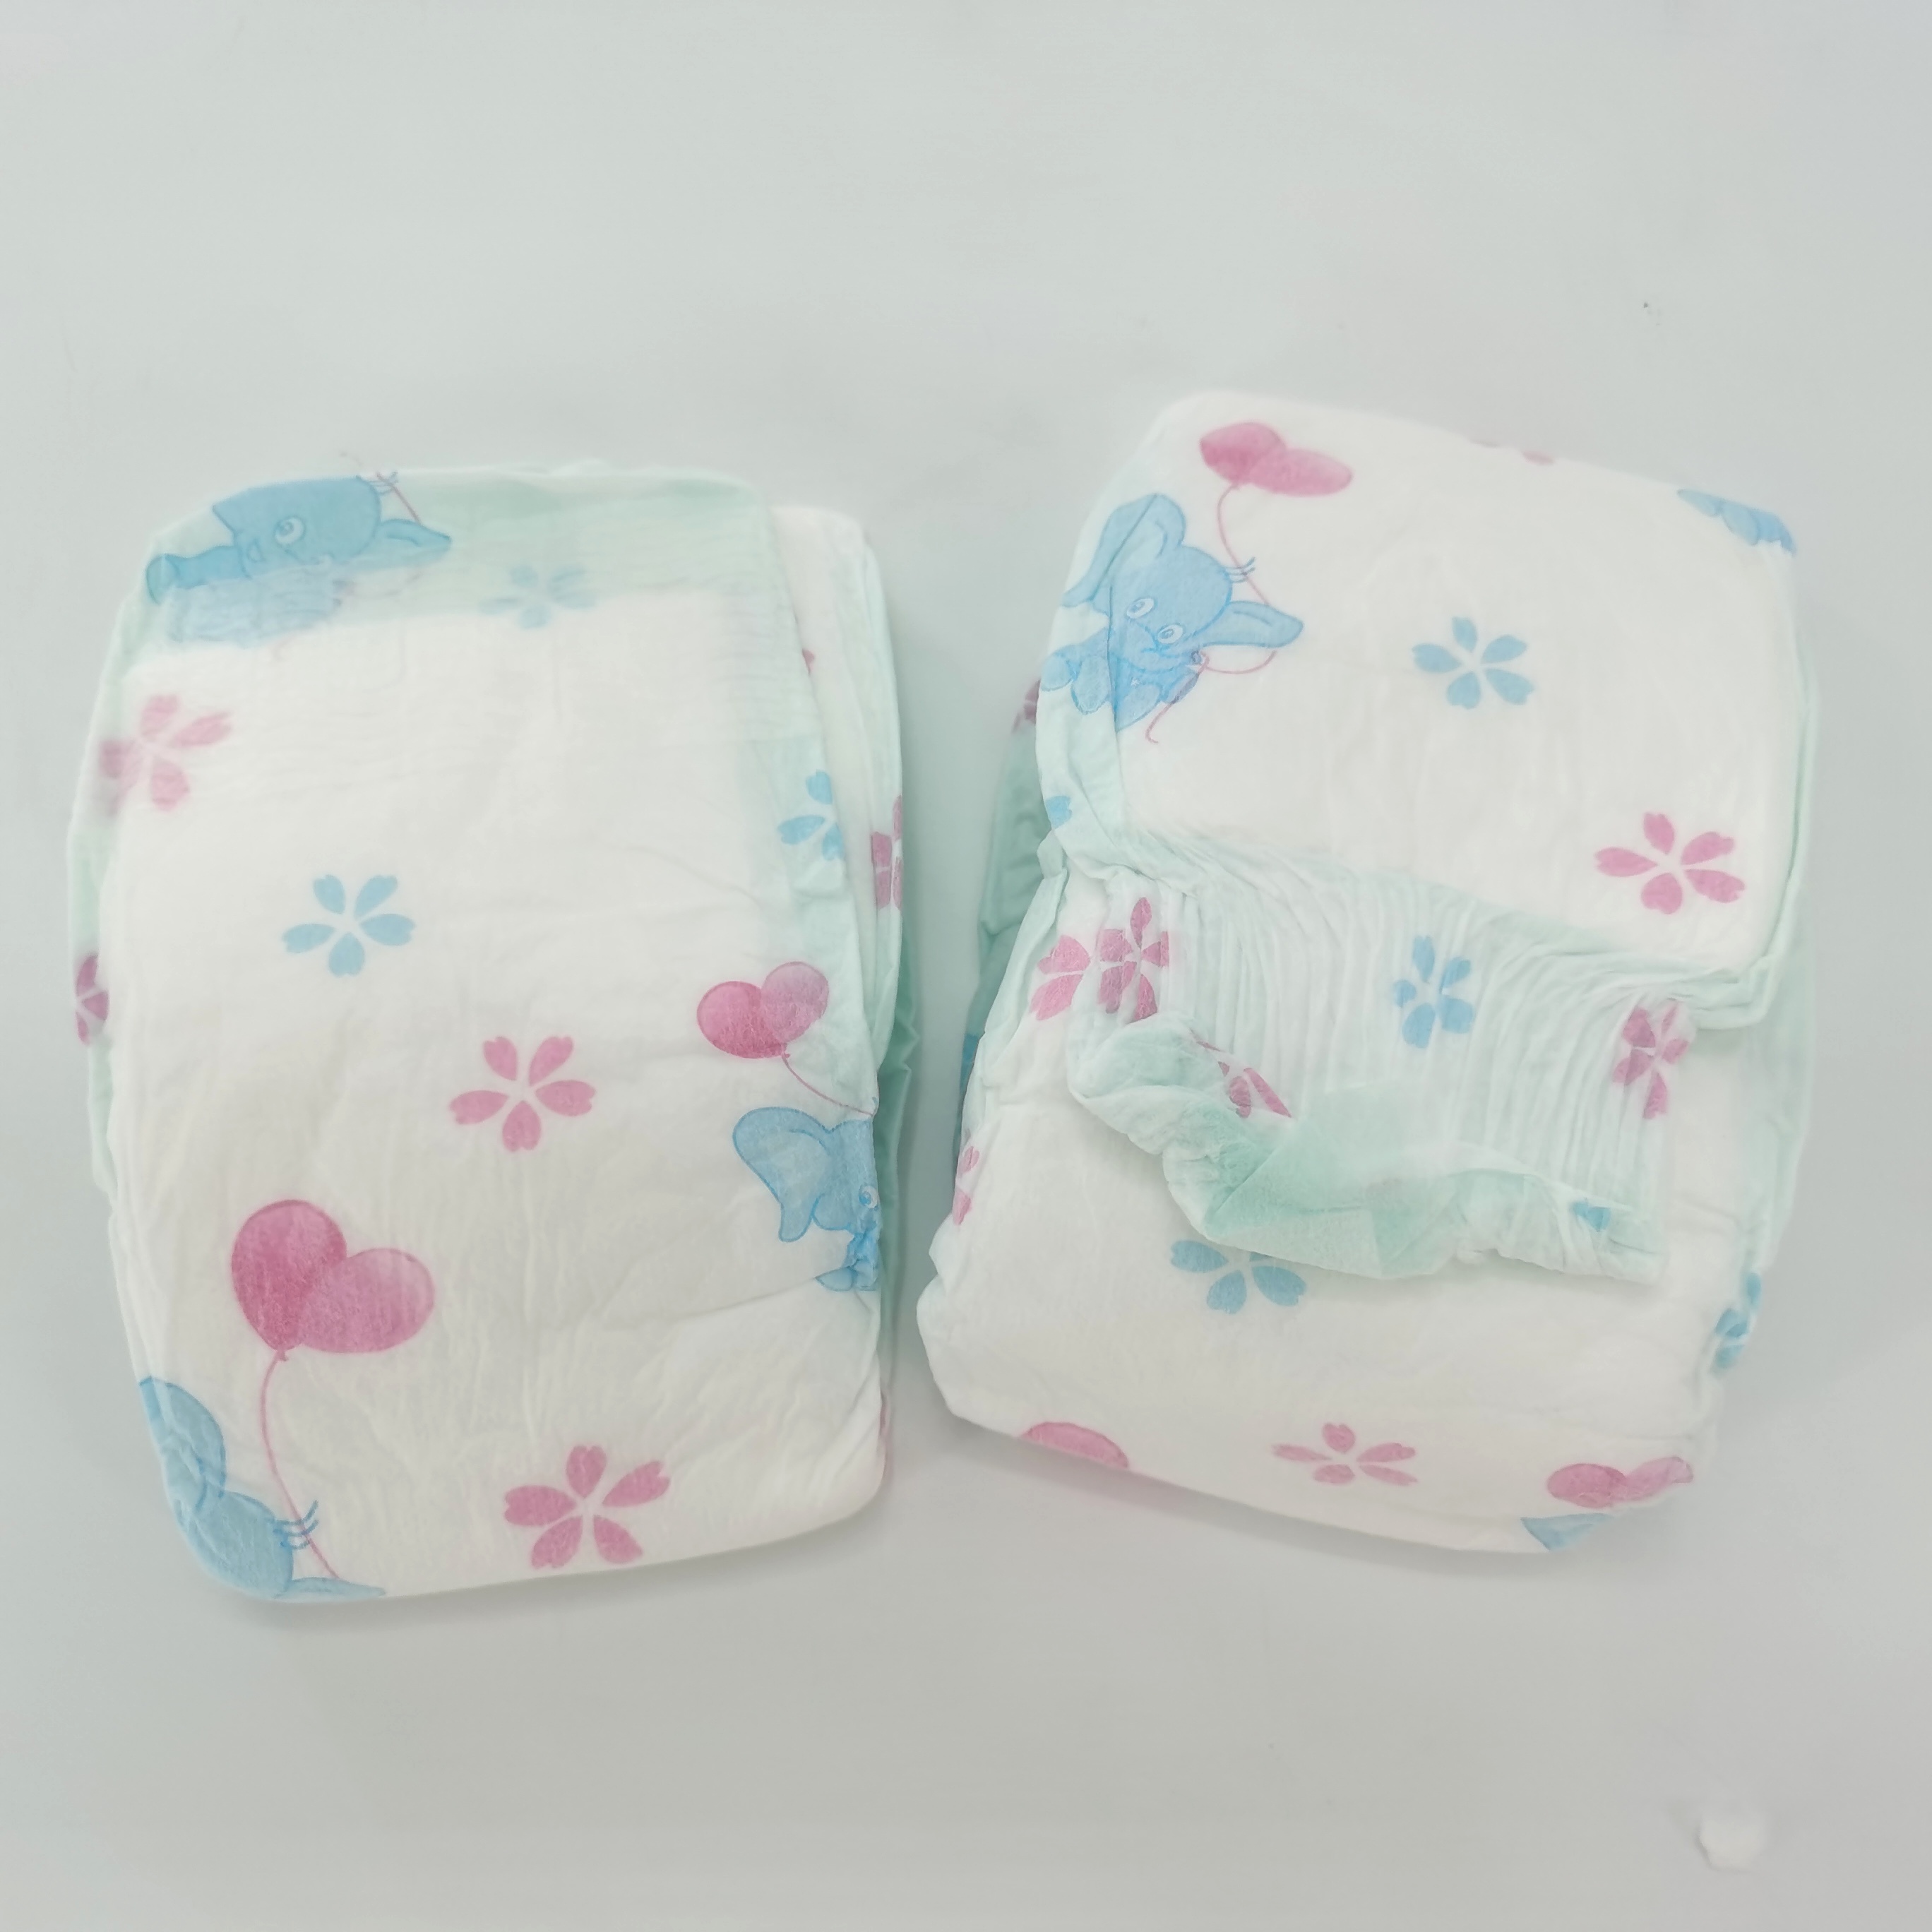 Hot sale Overnight Diapers Size 3 - High absorbency Disposable Breathable BabyDiaper japan sap – Ensha